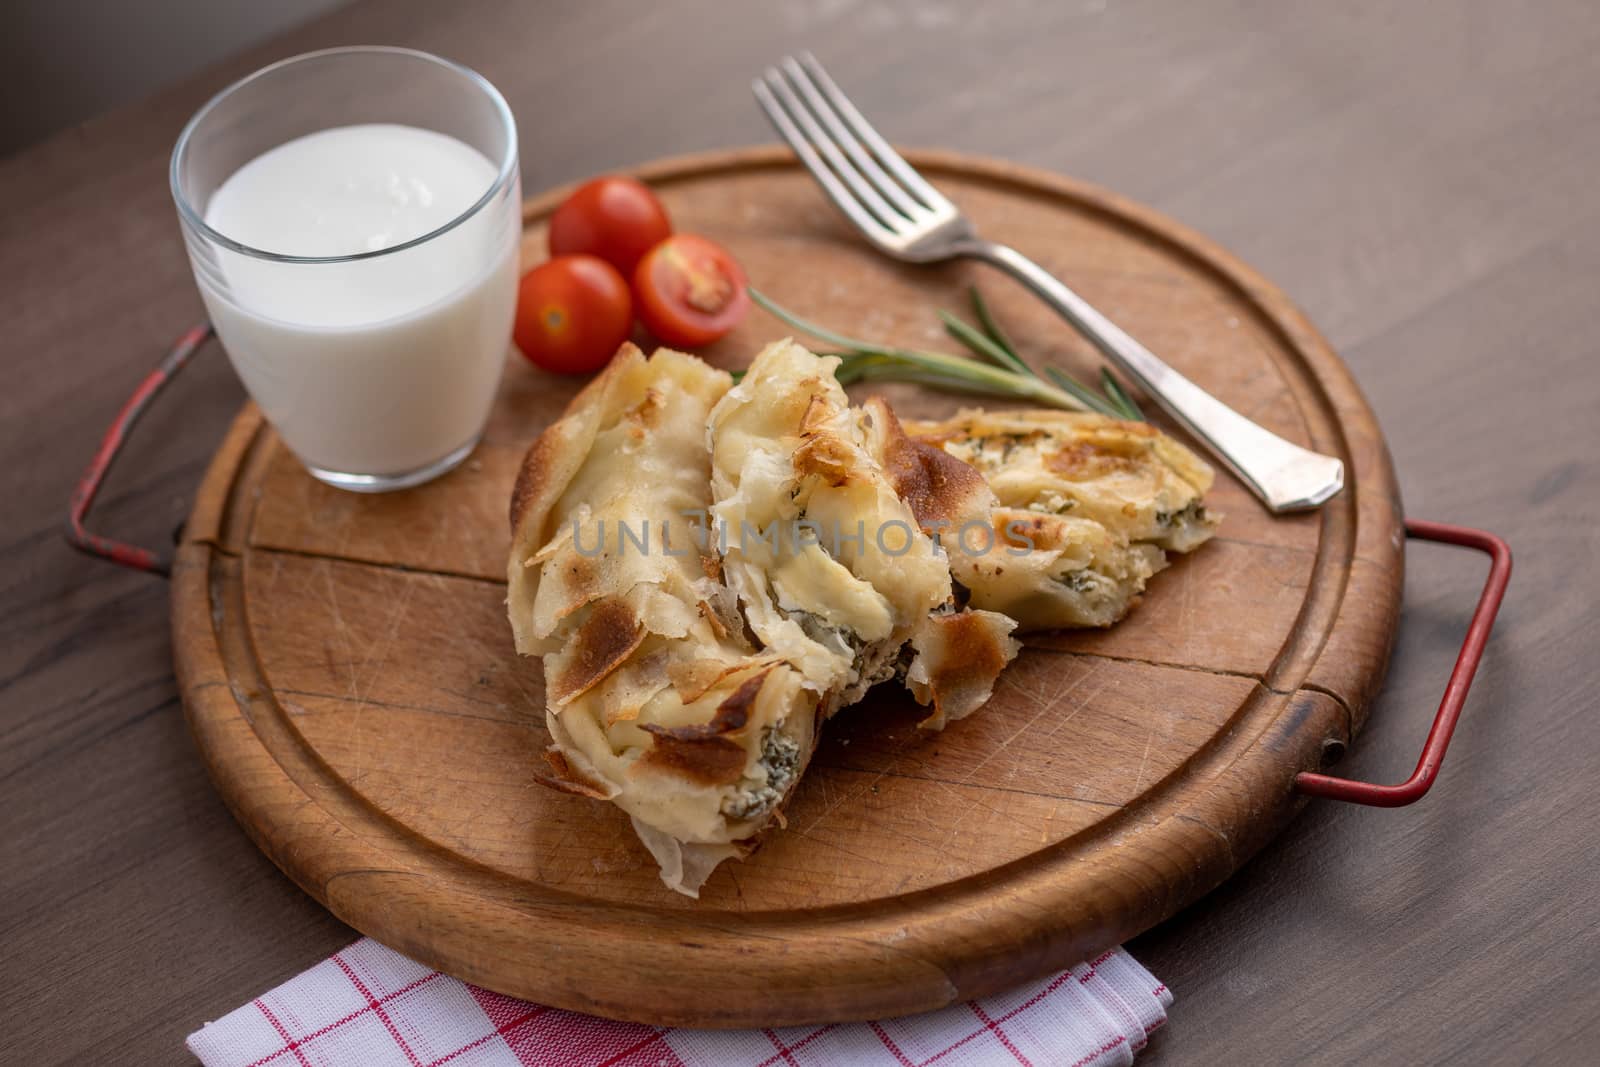 Traditional balkan breakfast - Burek pie with cheese and spinach by adamr